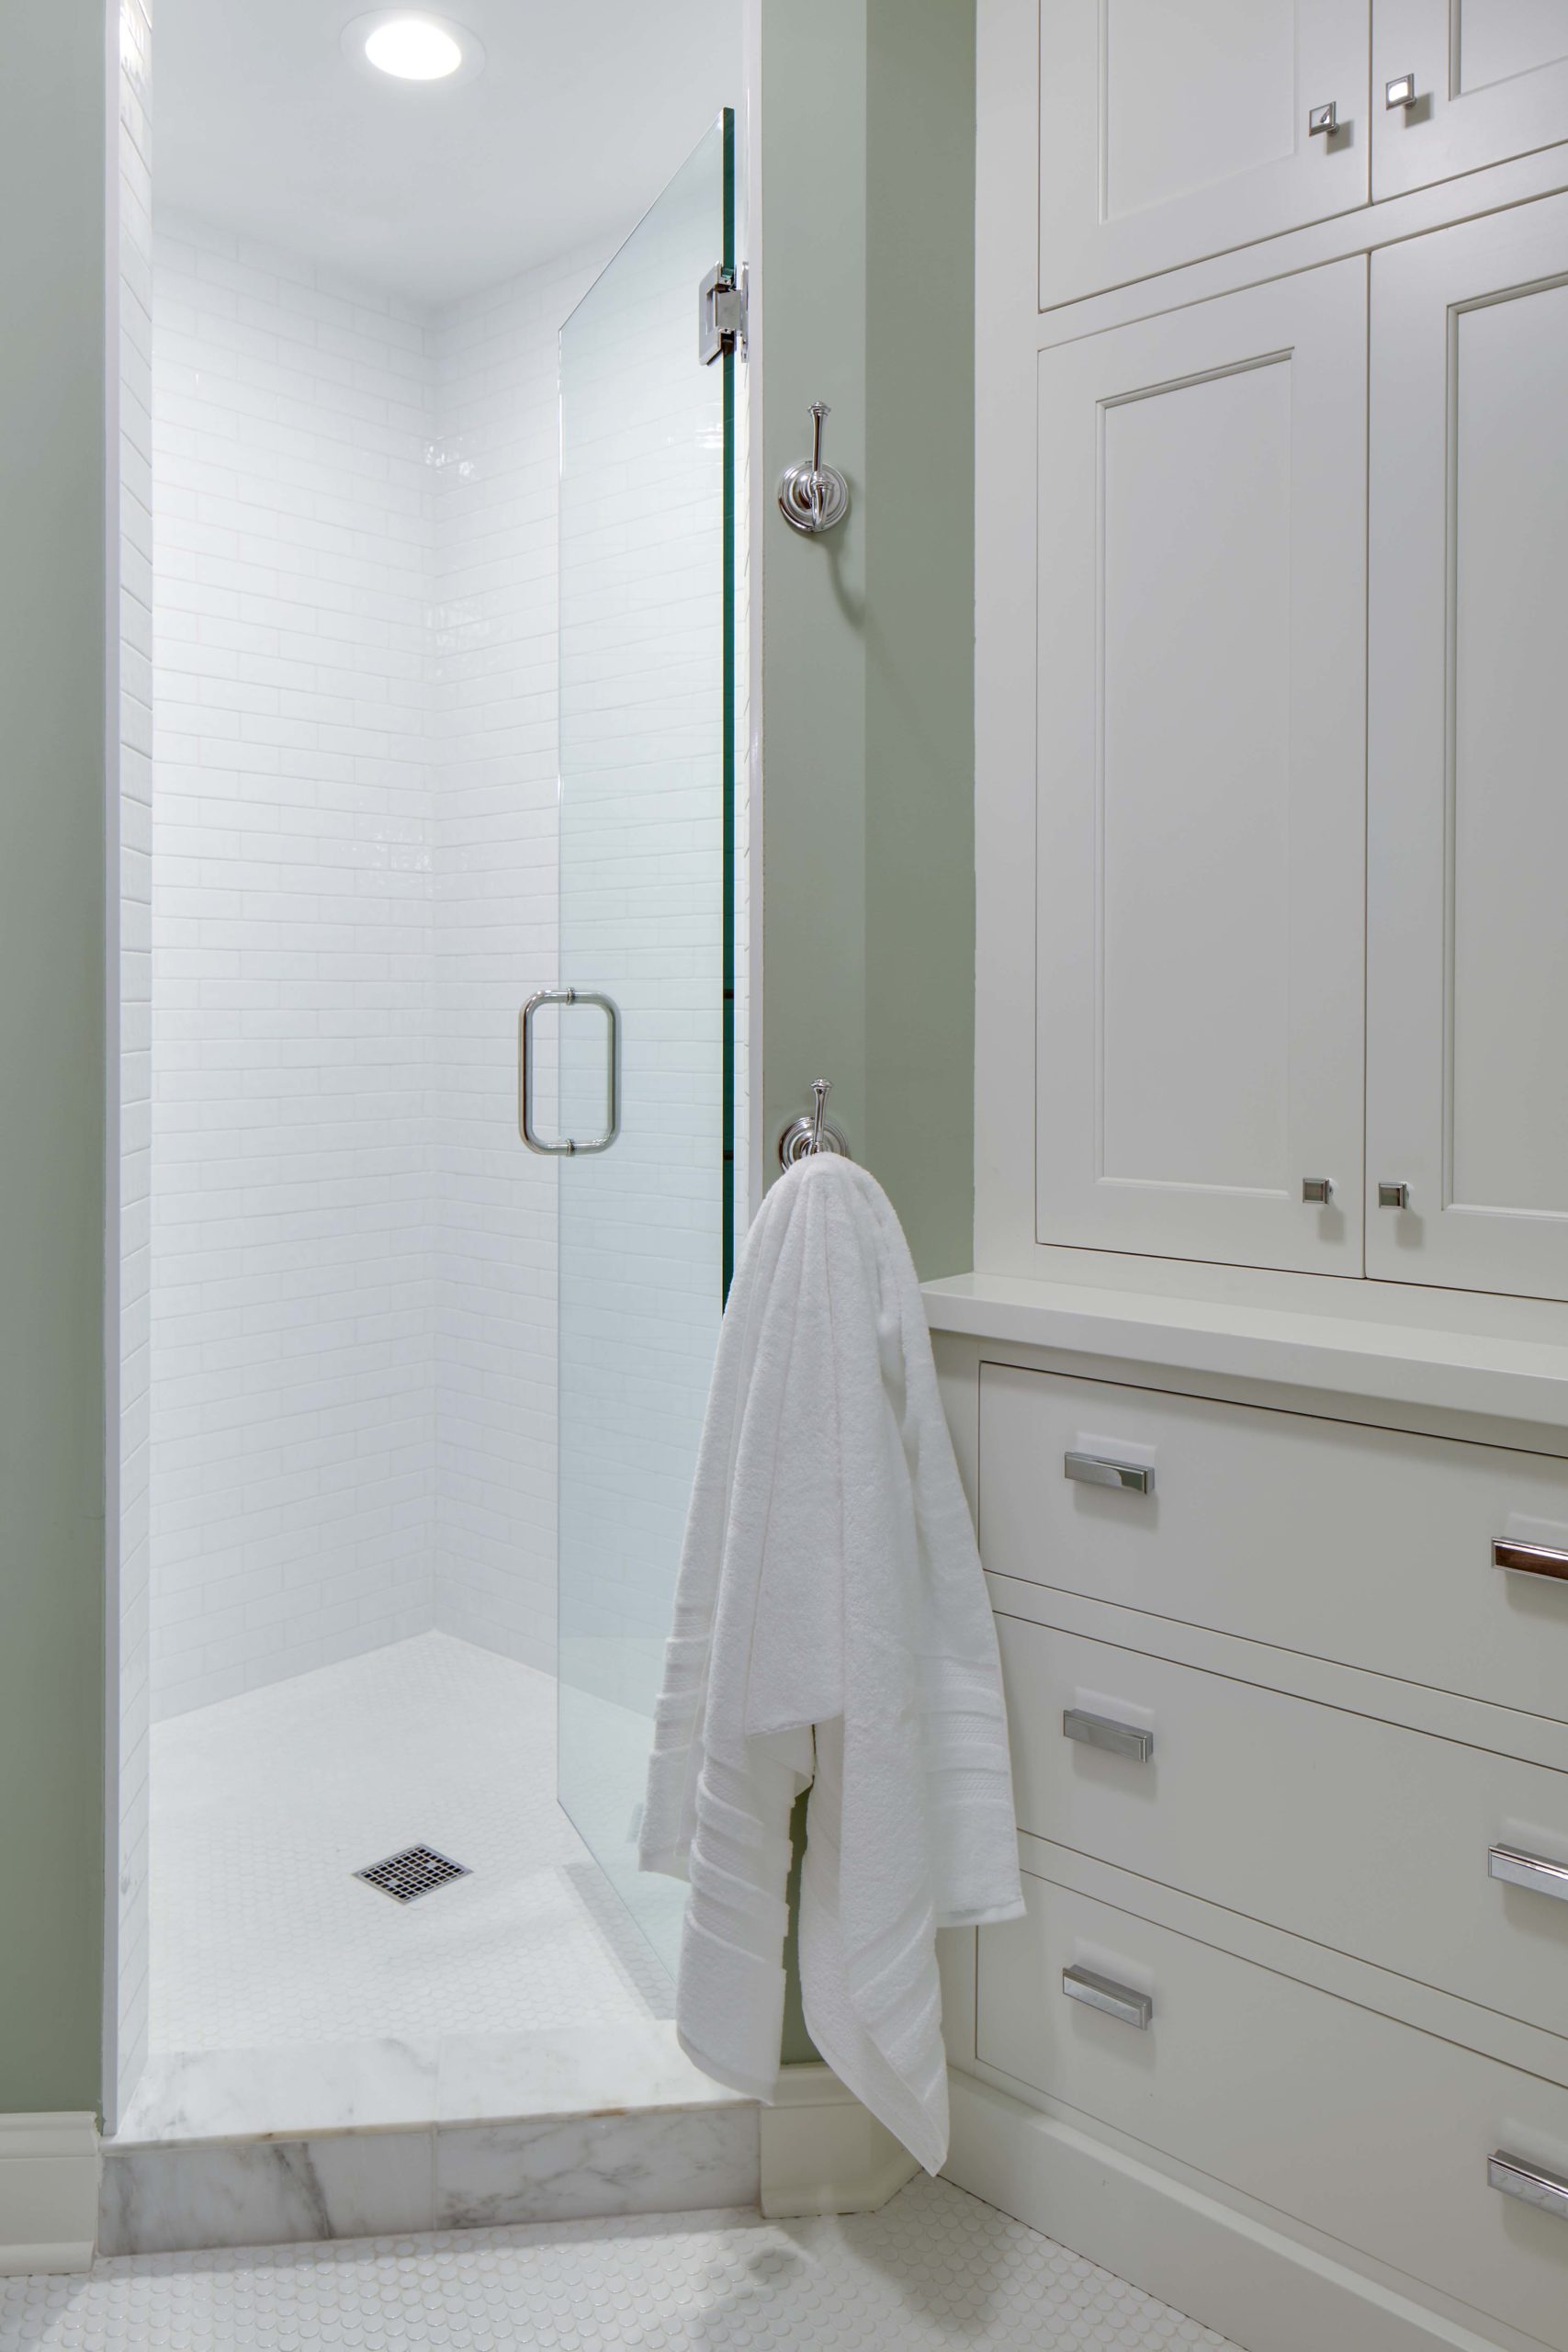 A white and green bathroom with a glass shower stall.